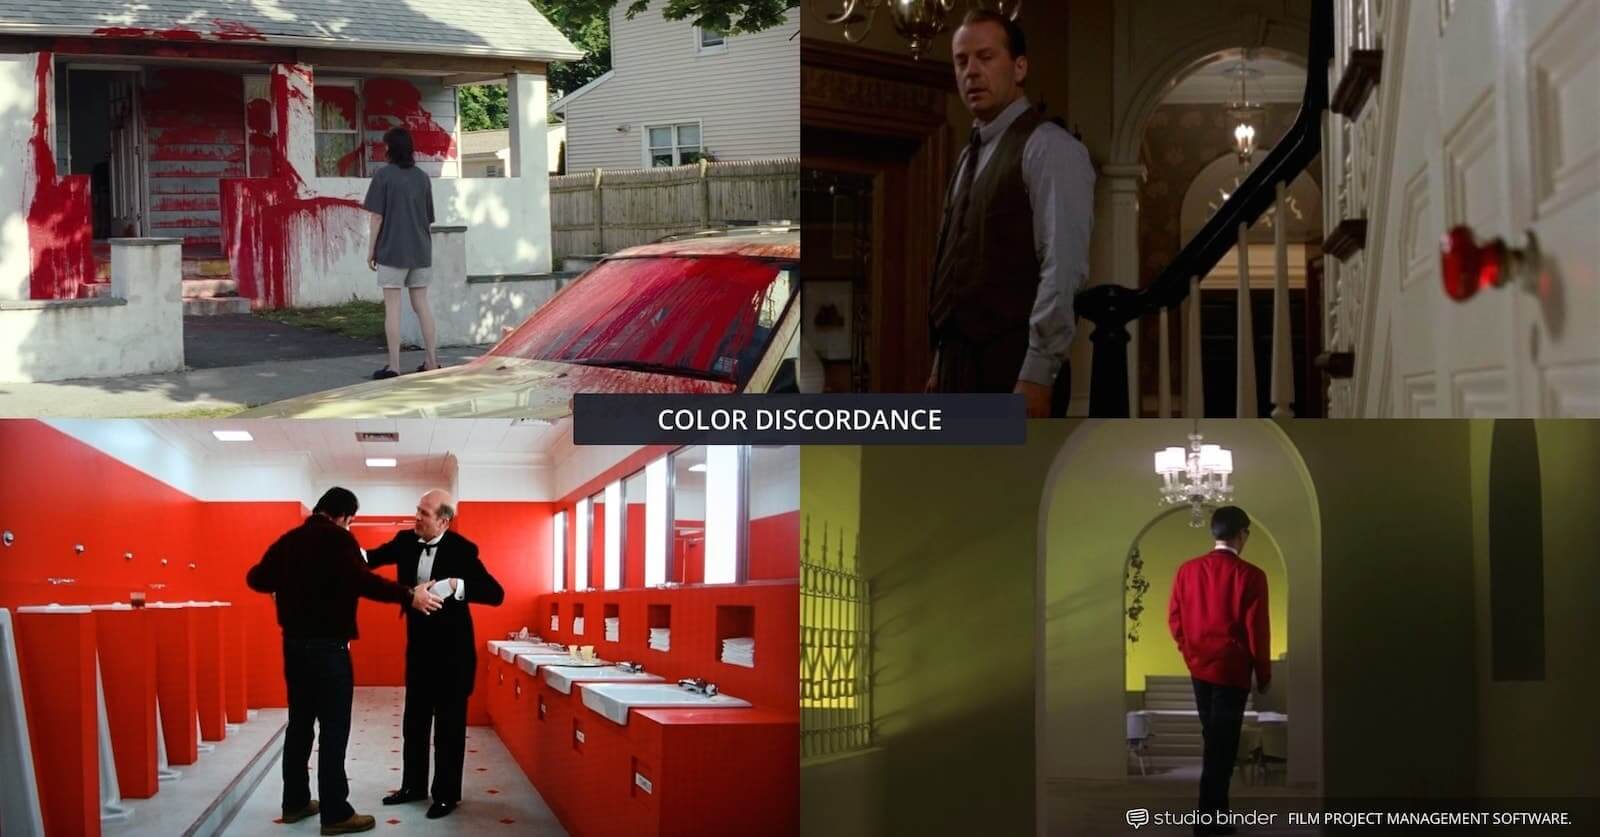 How to Use Color in Film - Movie Color Palette - Color Discordance - Multiple Examples